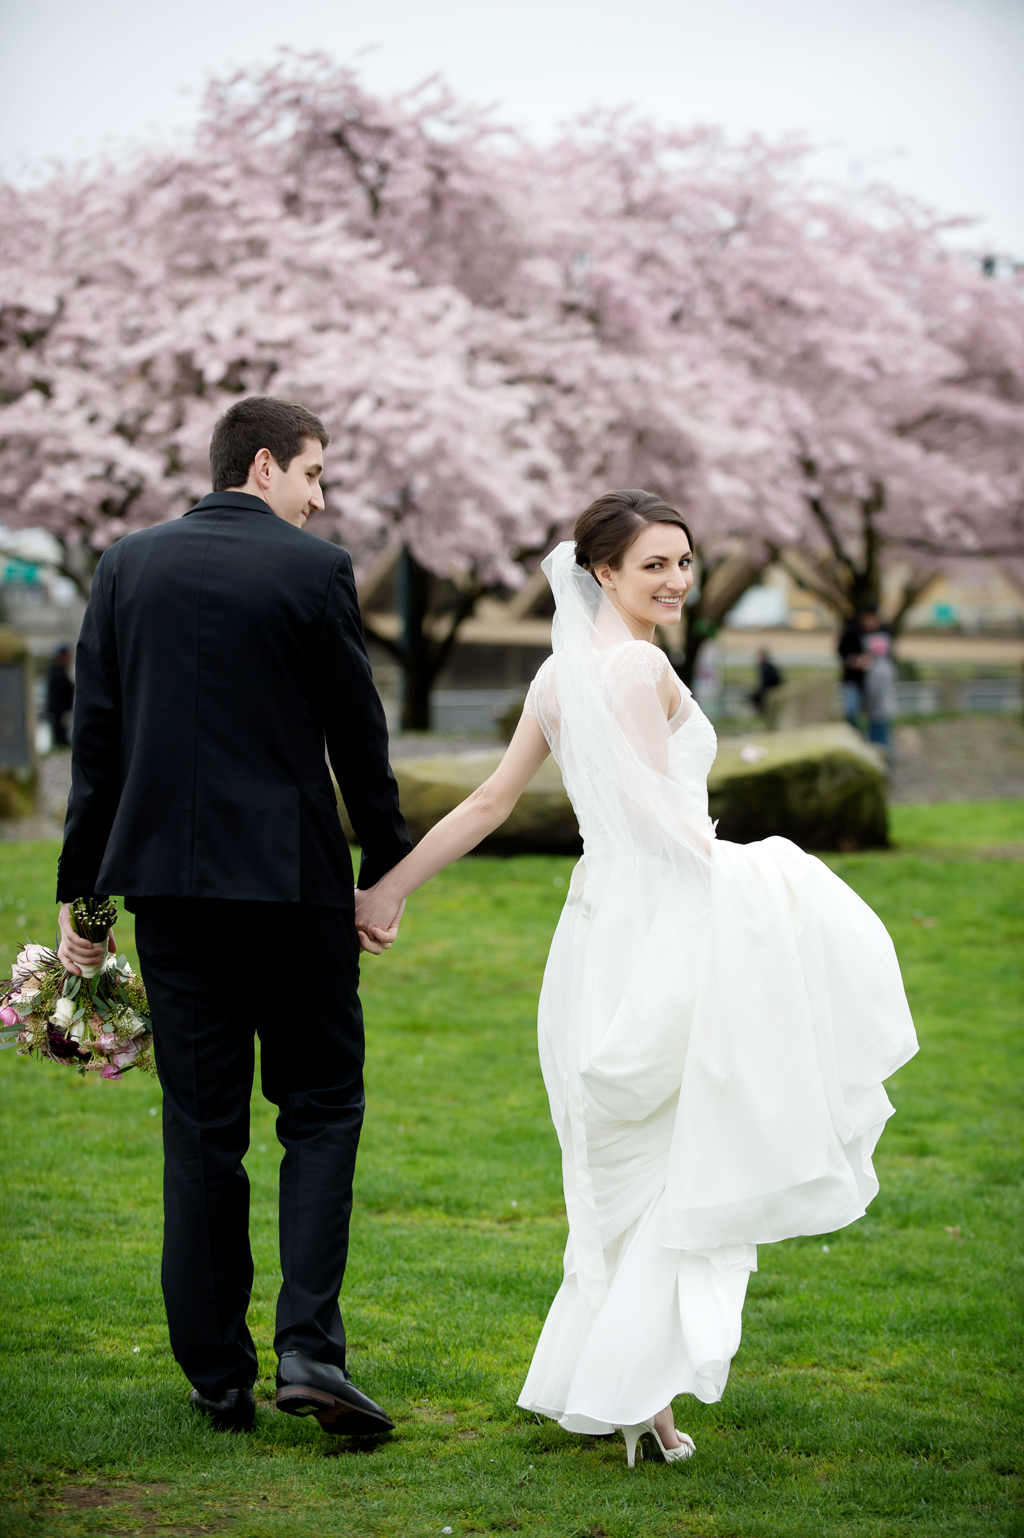 a bride and groom walk holding hands toward cherry blossom trees